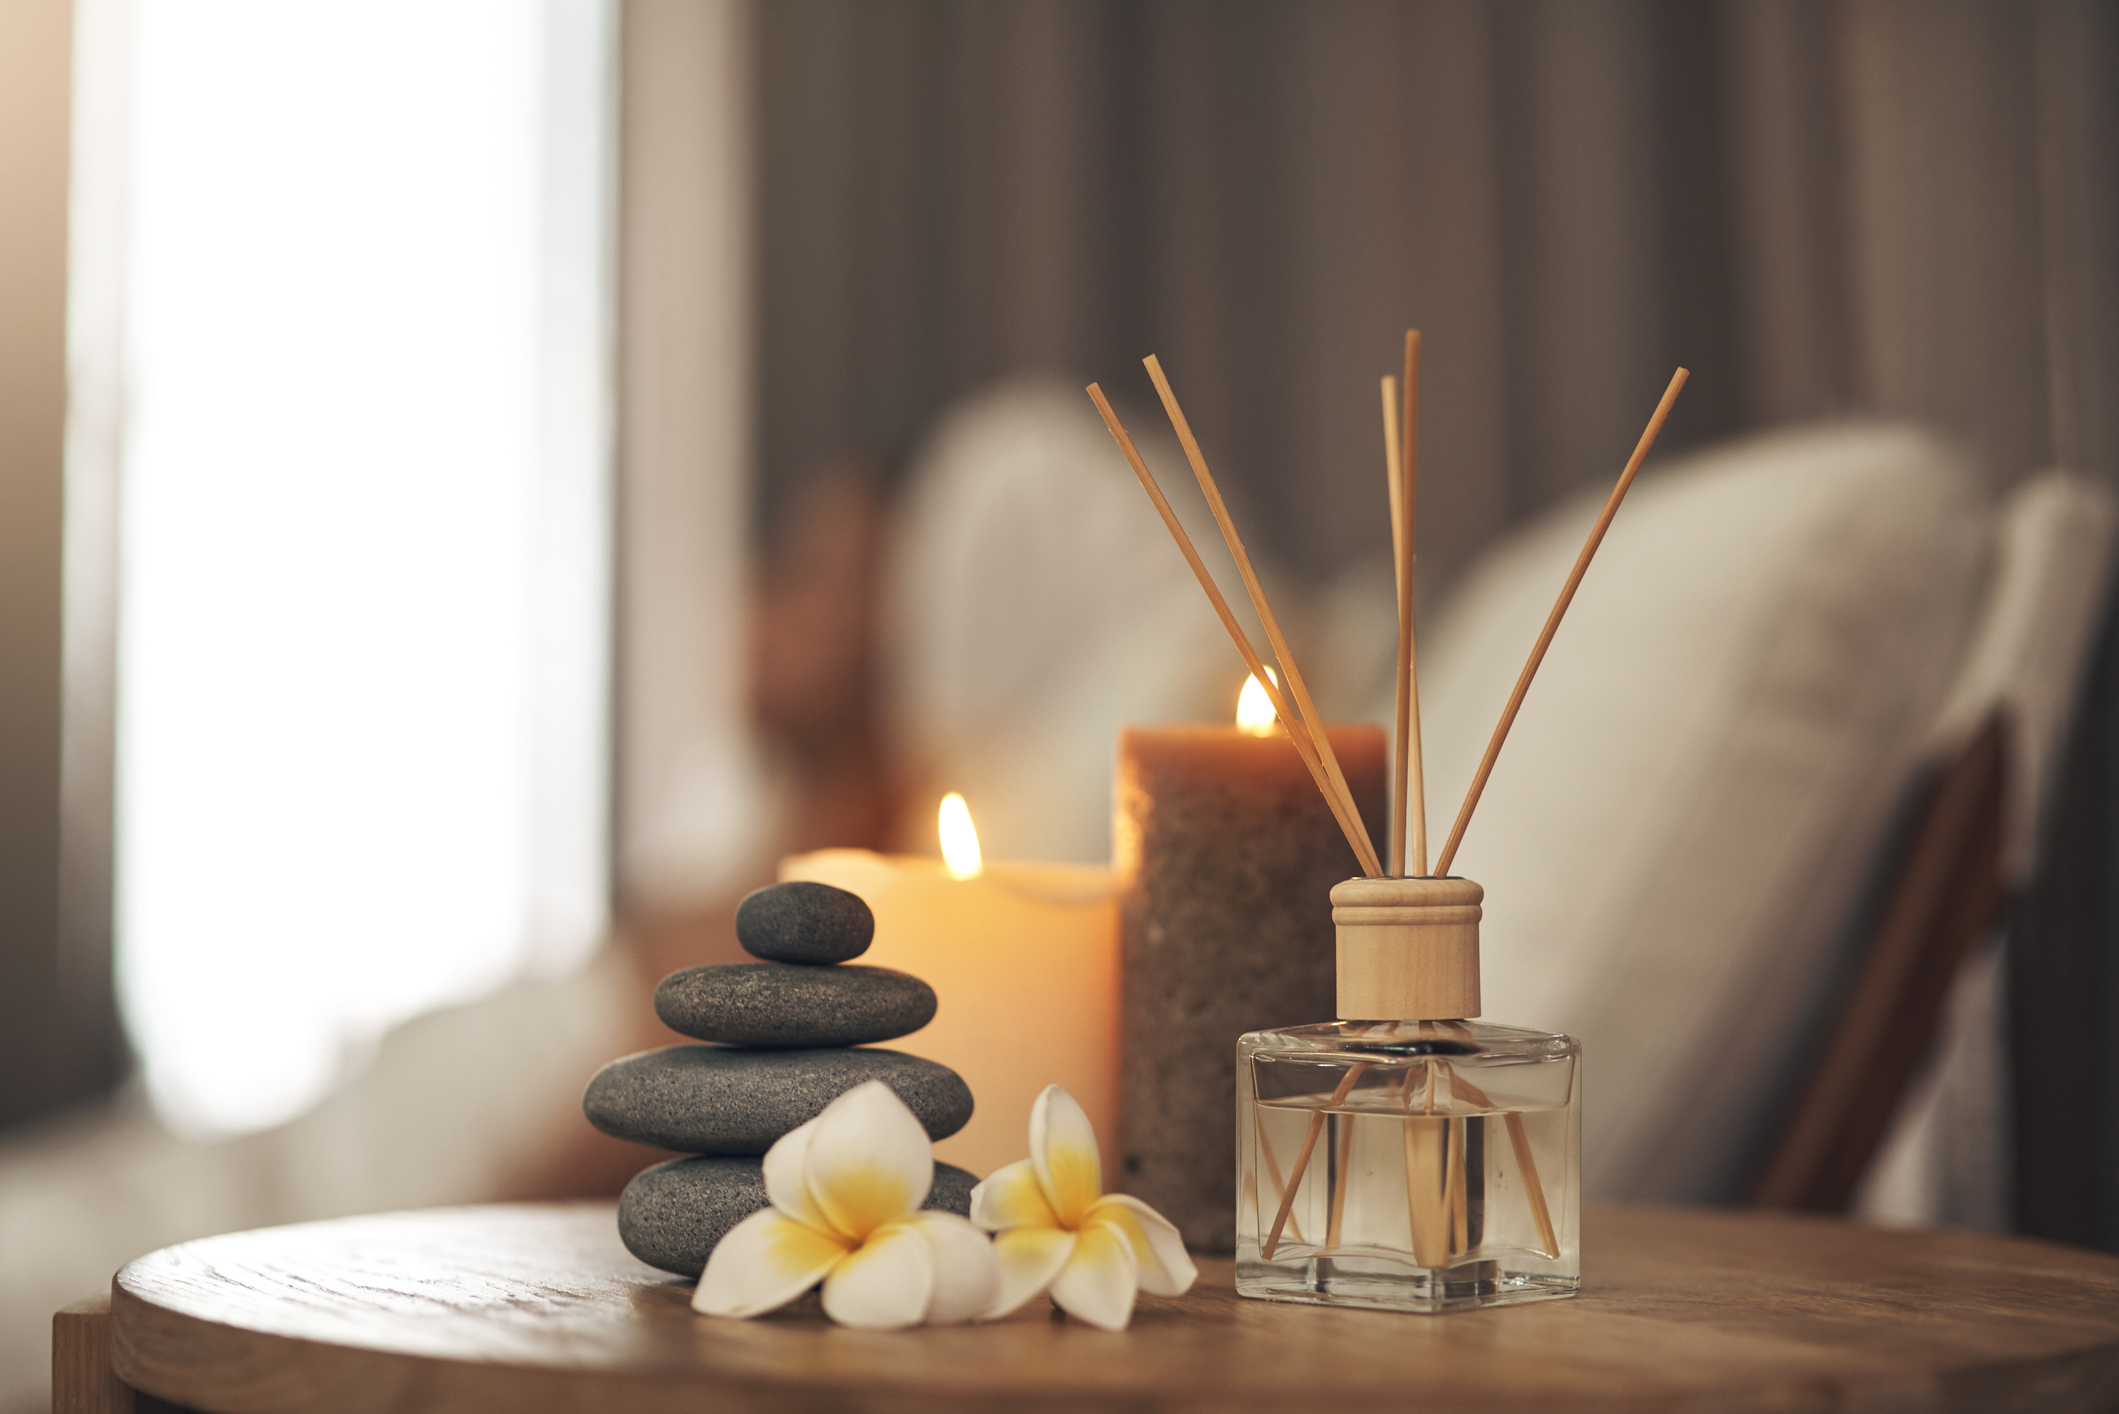 Relax and Rejuvenate With the Best Arlington Massage in Fielder Plaza